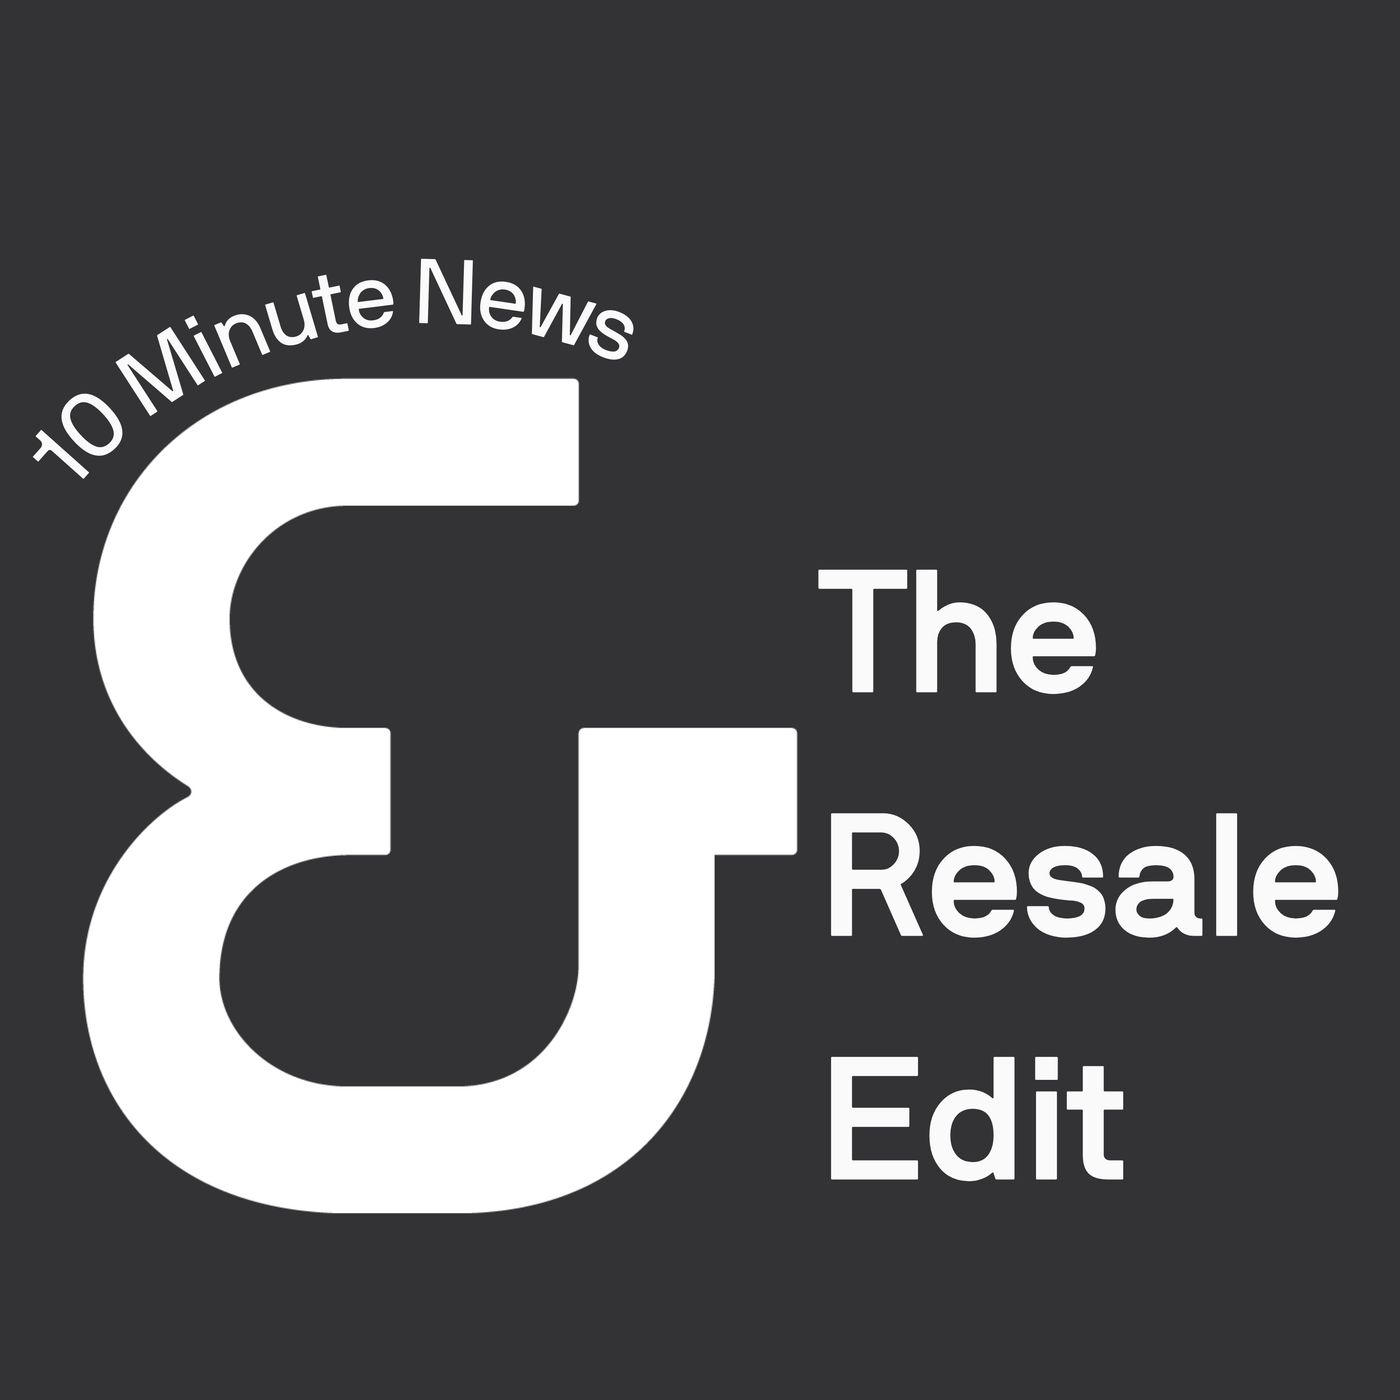 The Resale Edit: We can’t expect business model change from brands that don’t make money on resale